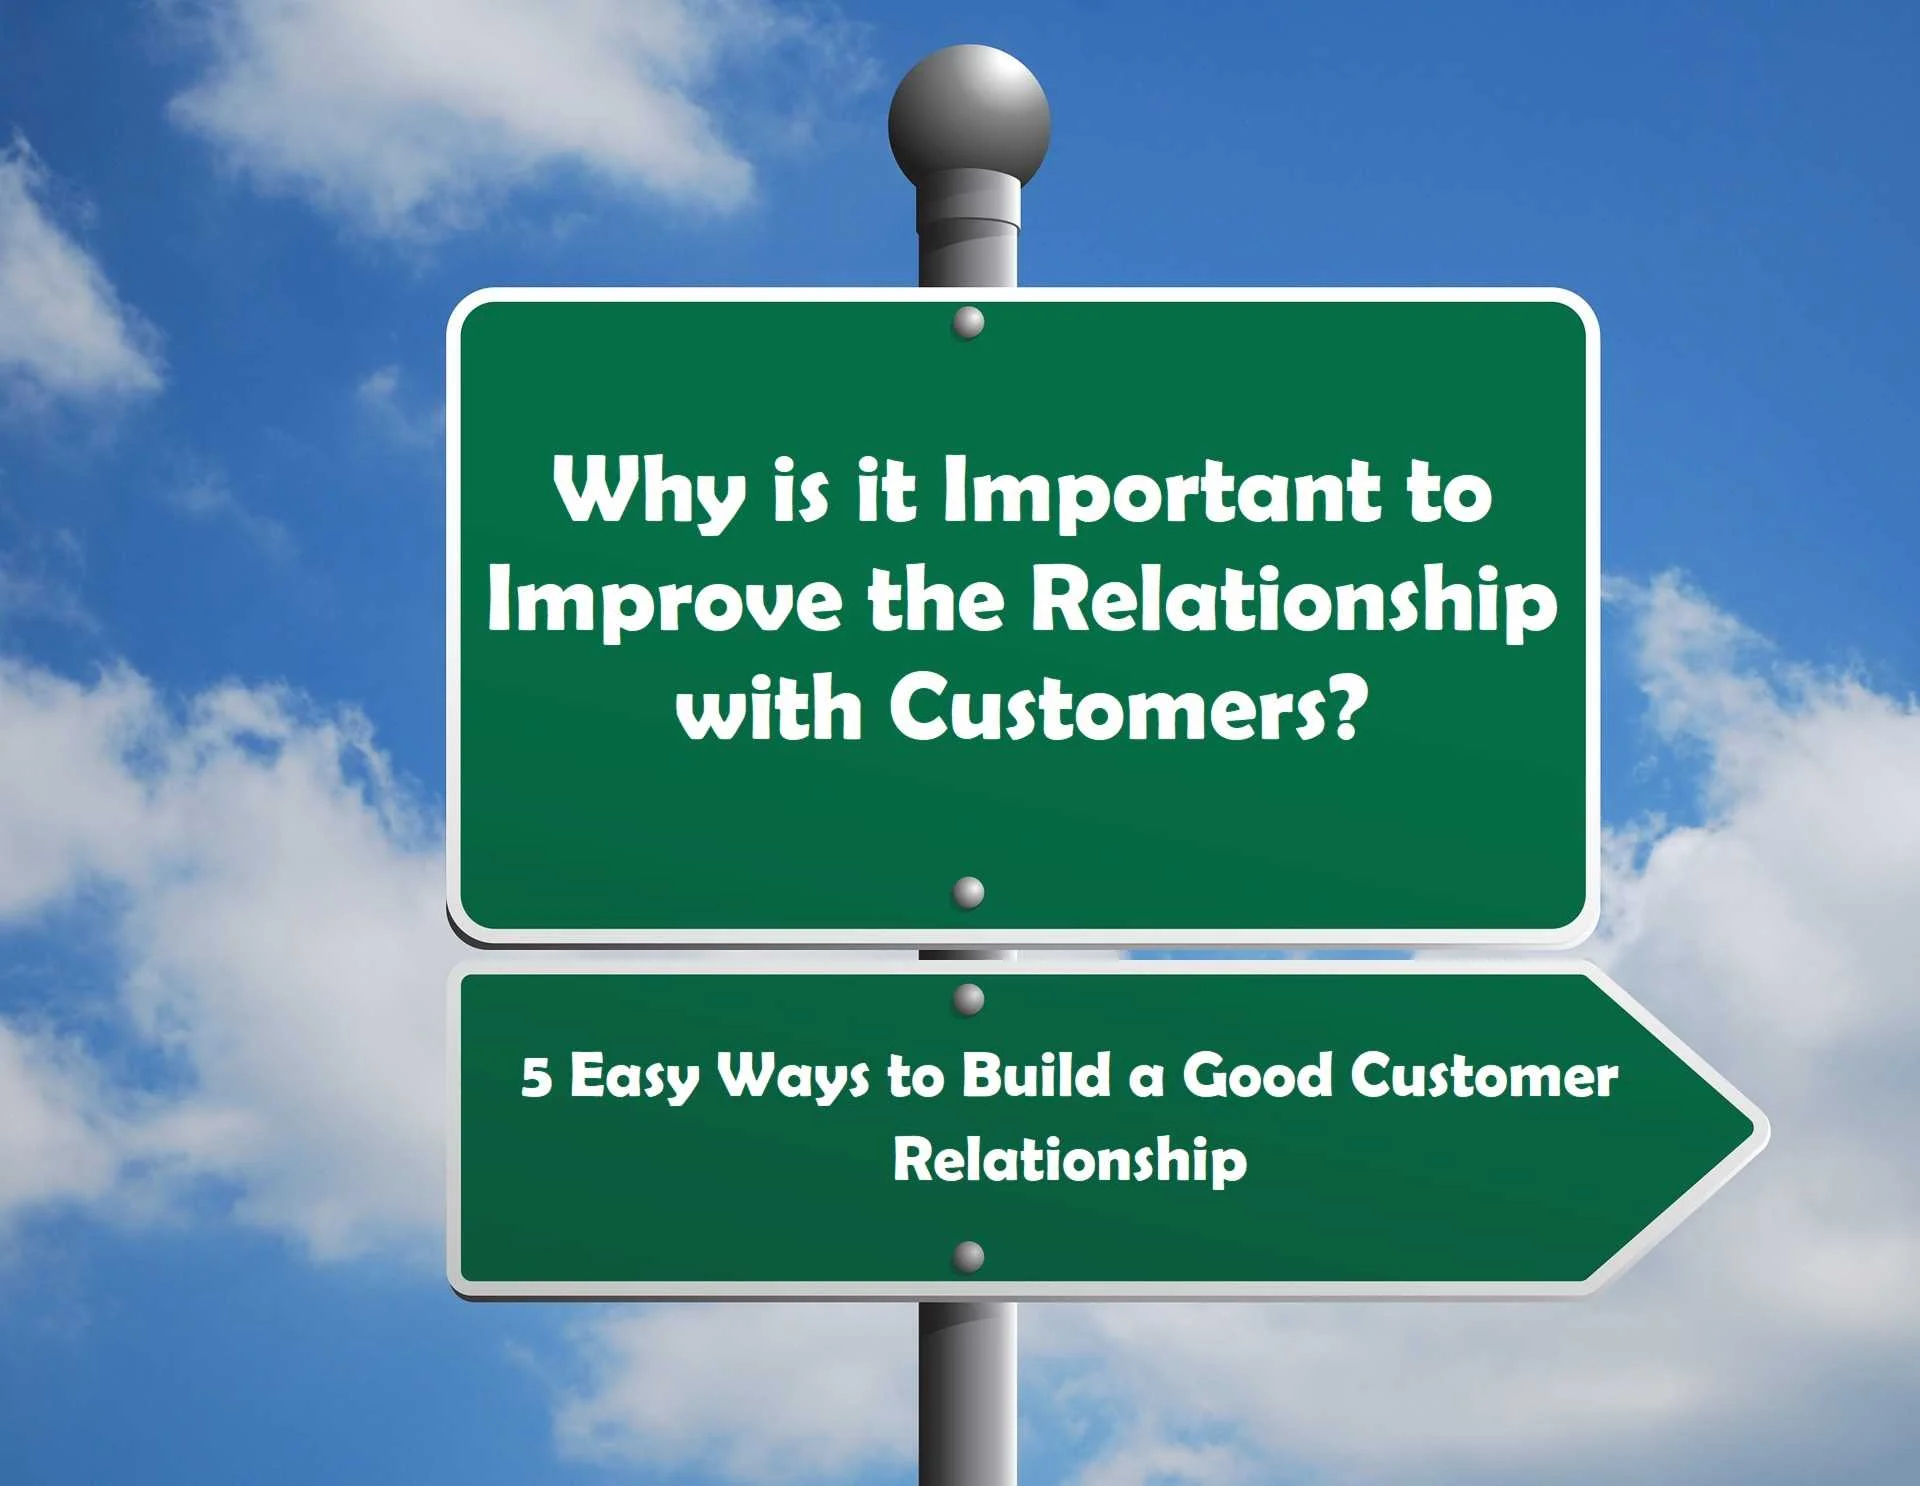 5 Easy Ways to Build a Good Customer Relationship